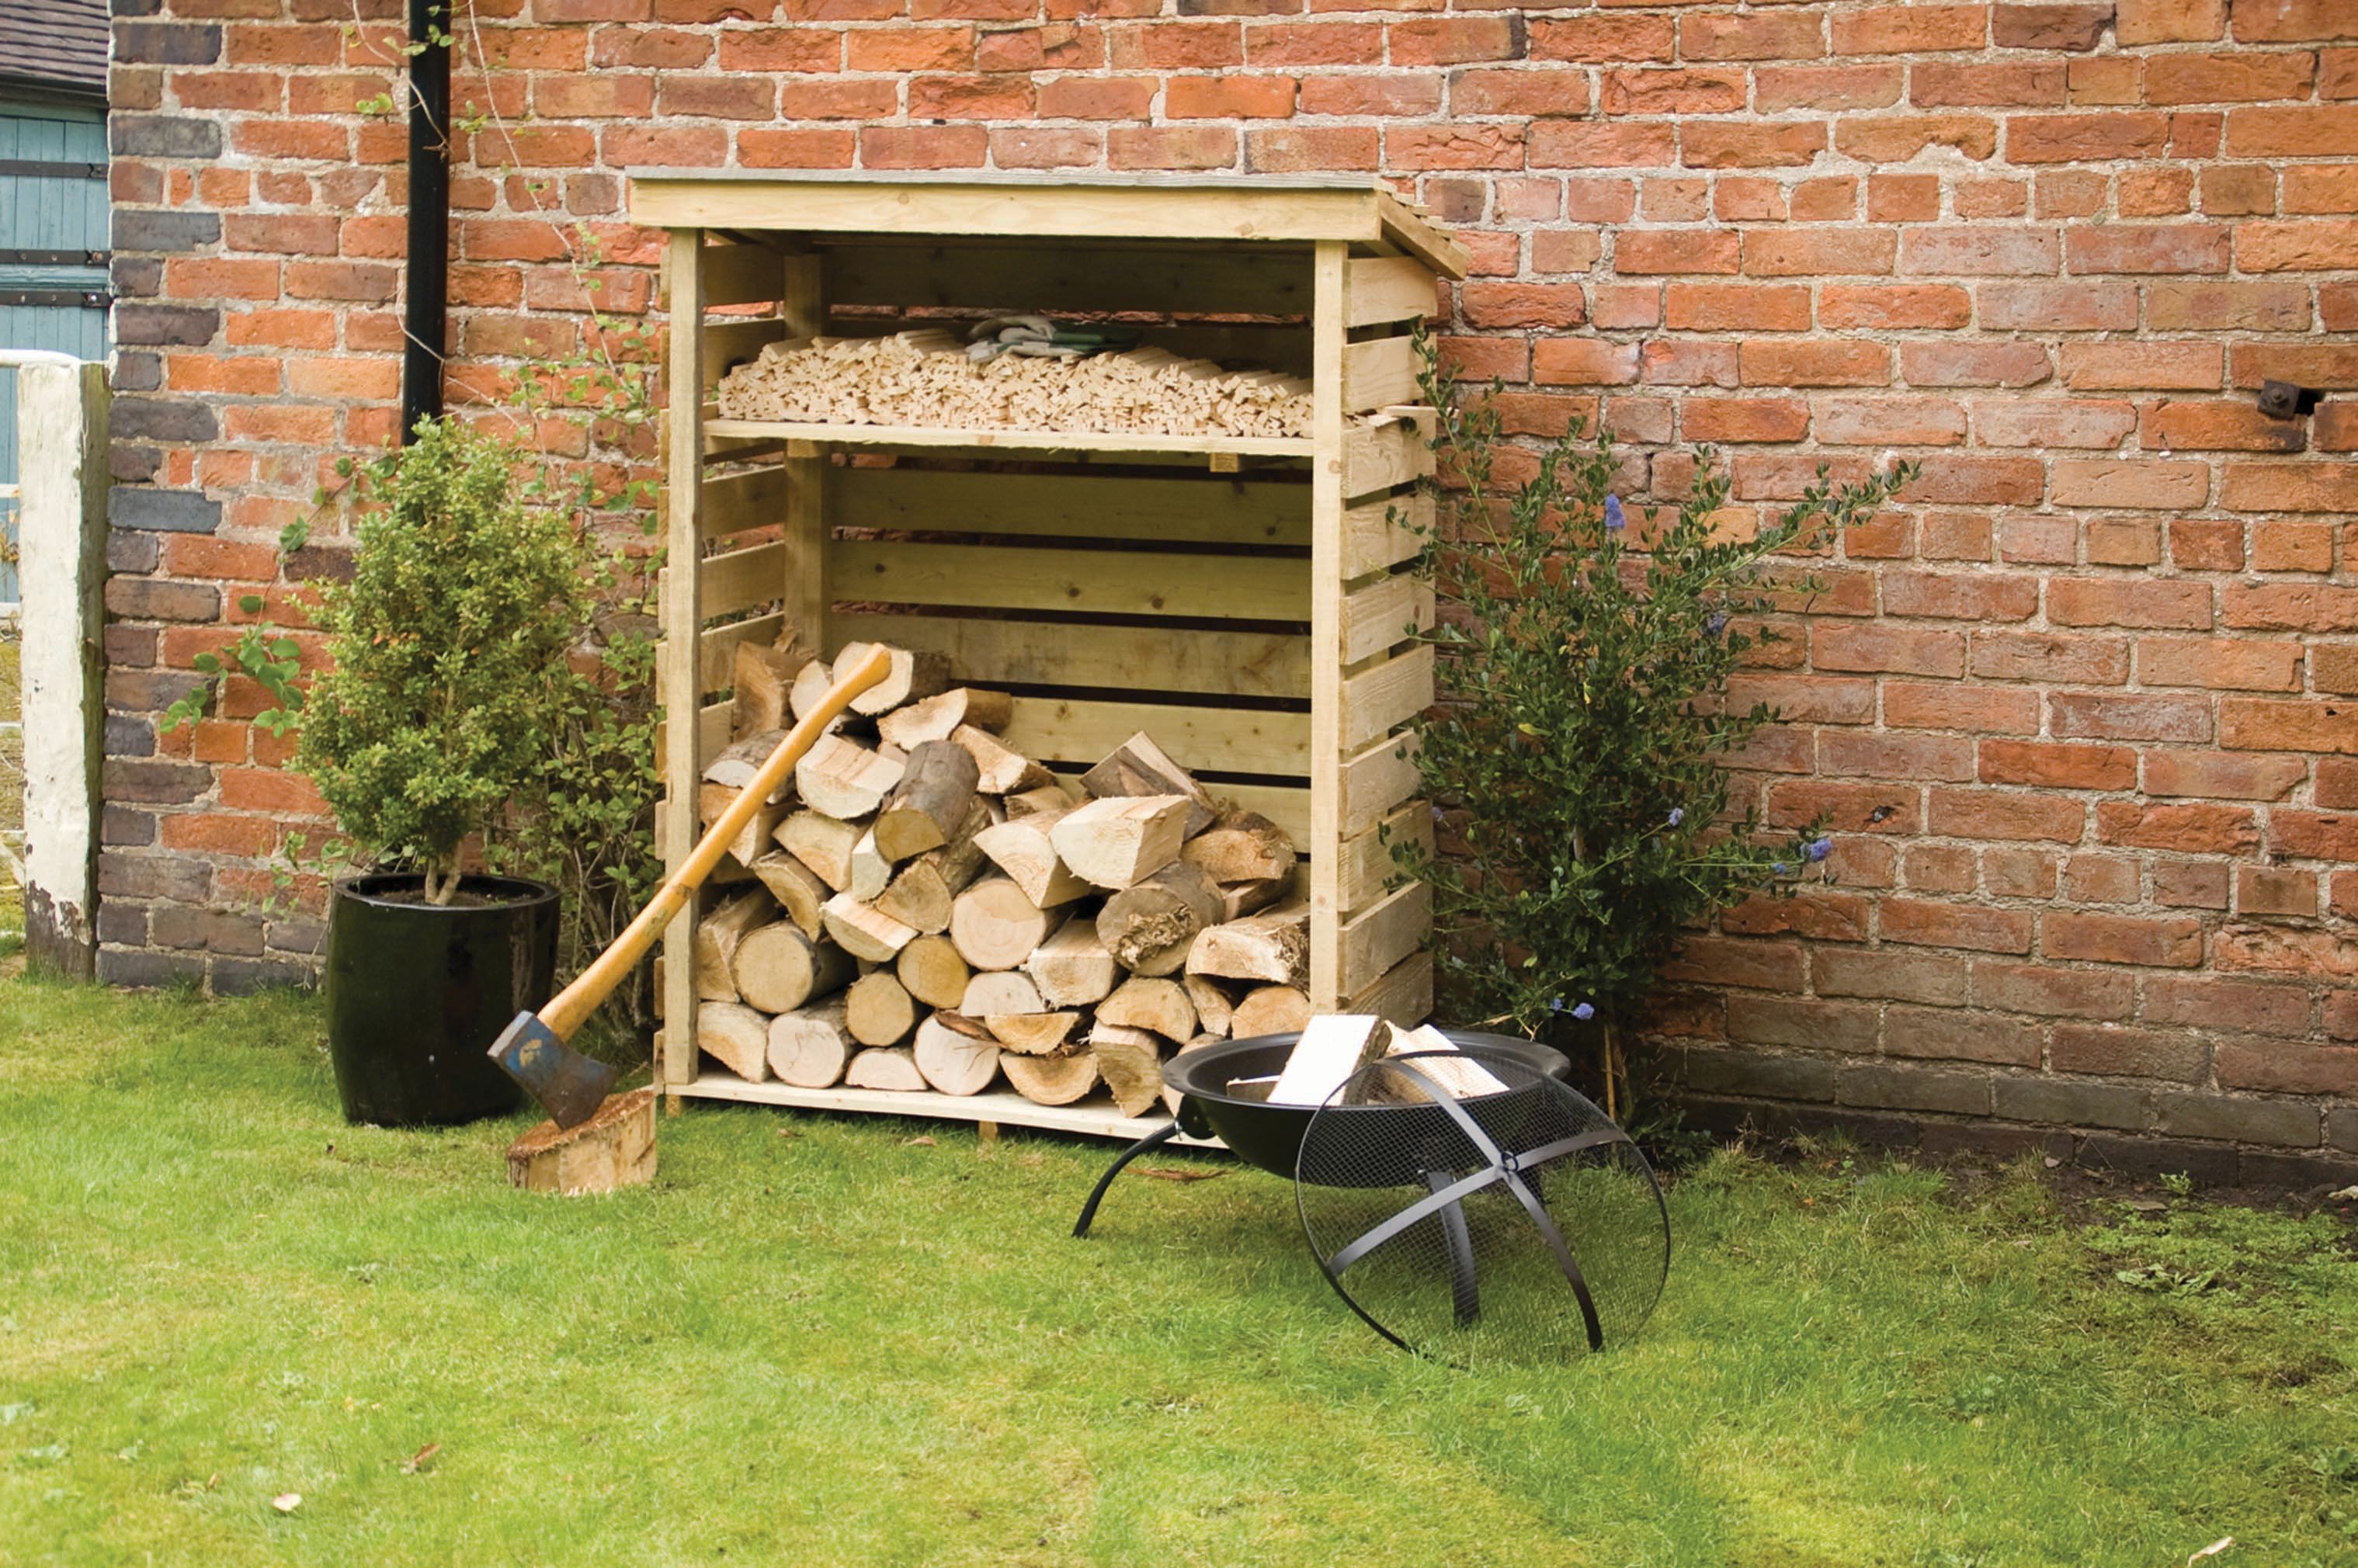 Image of Rowlinson 4 x 2ft Small Pressure Treated Timber Log Store